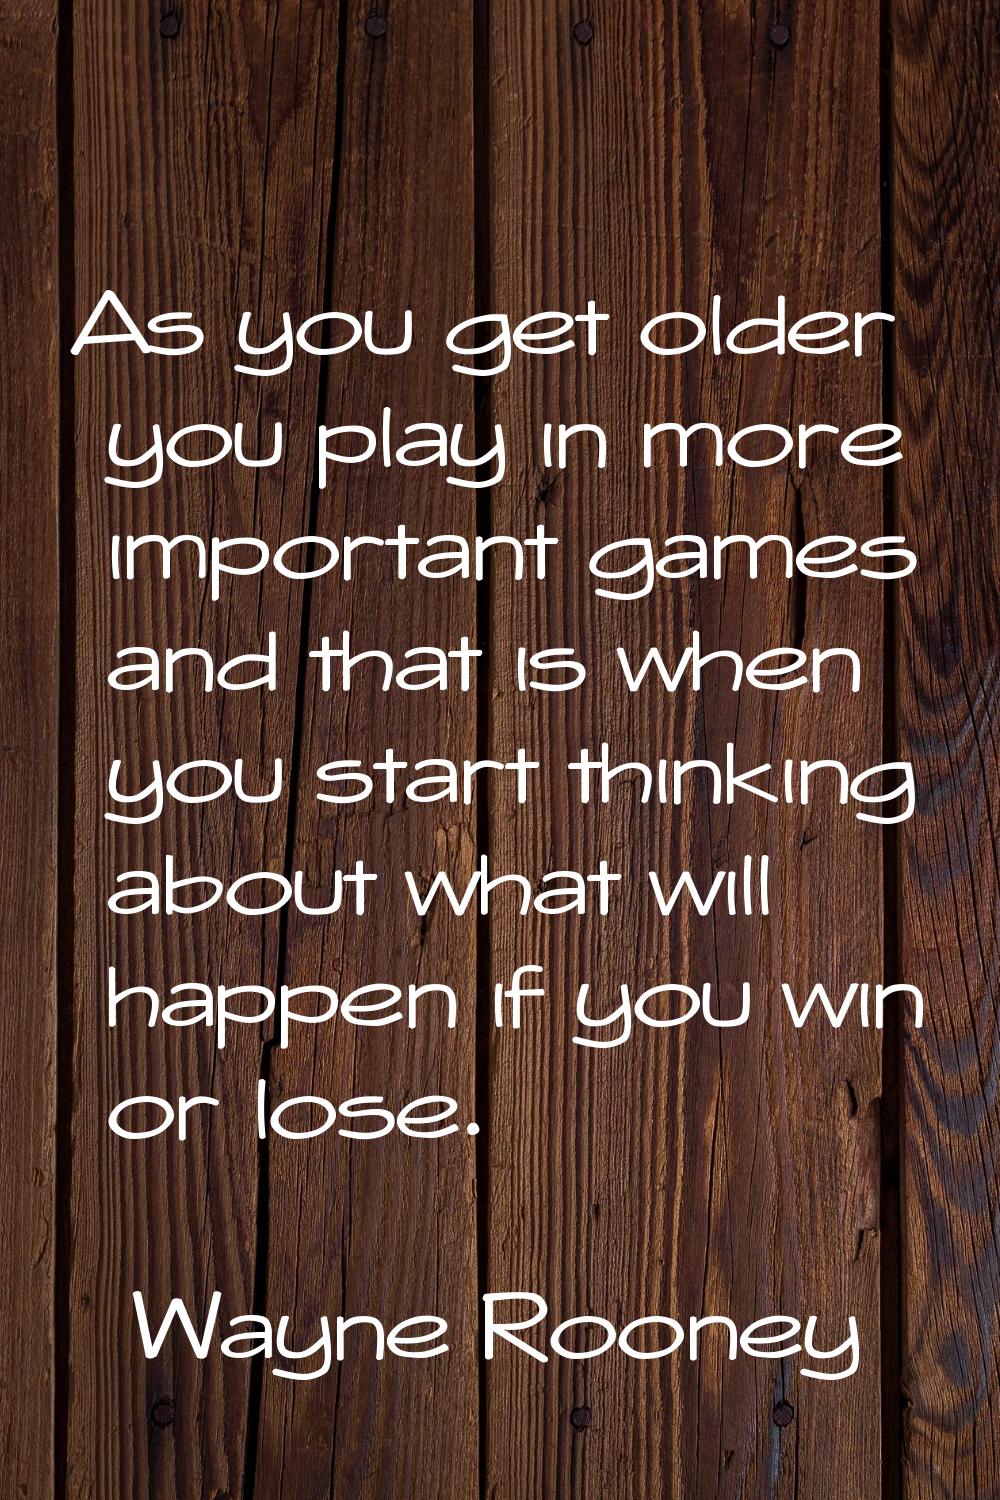 As you get older you play in more important games and that is when you start thinking about what wi